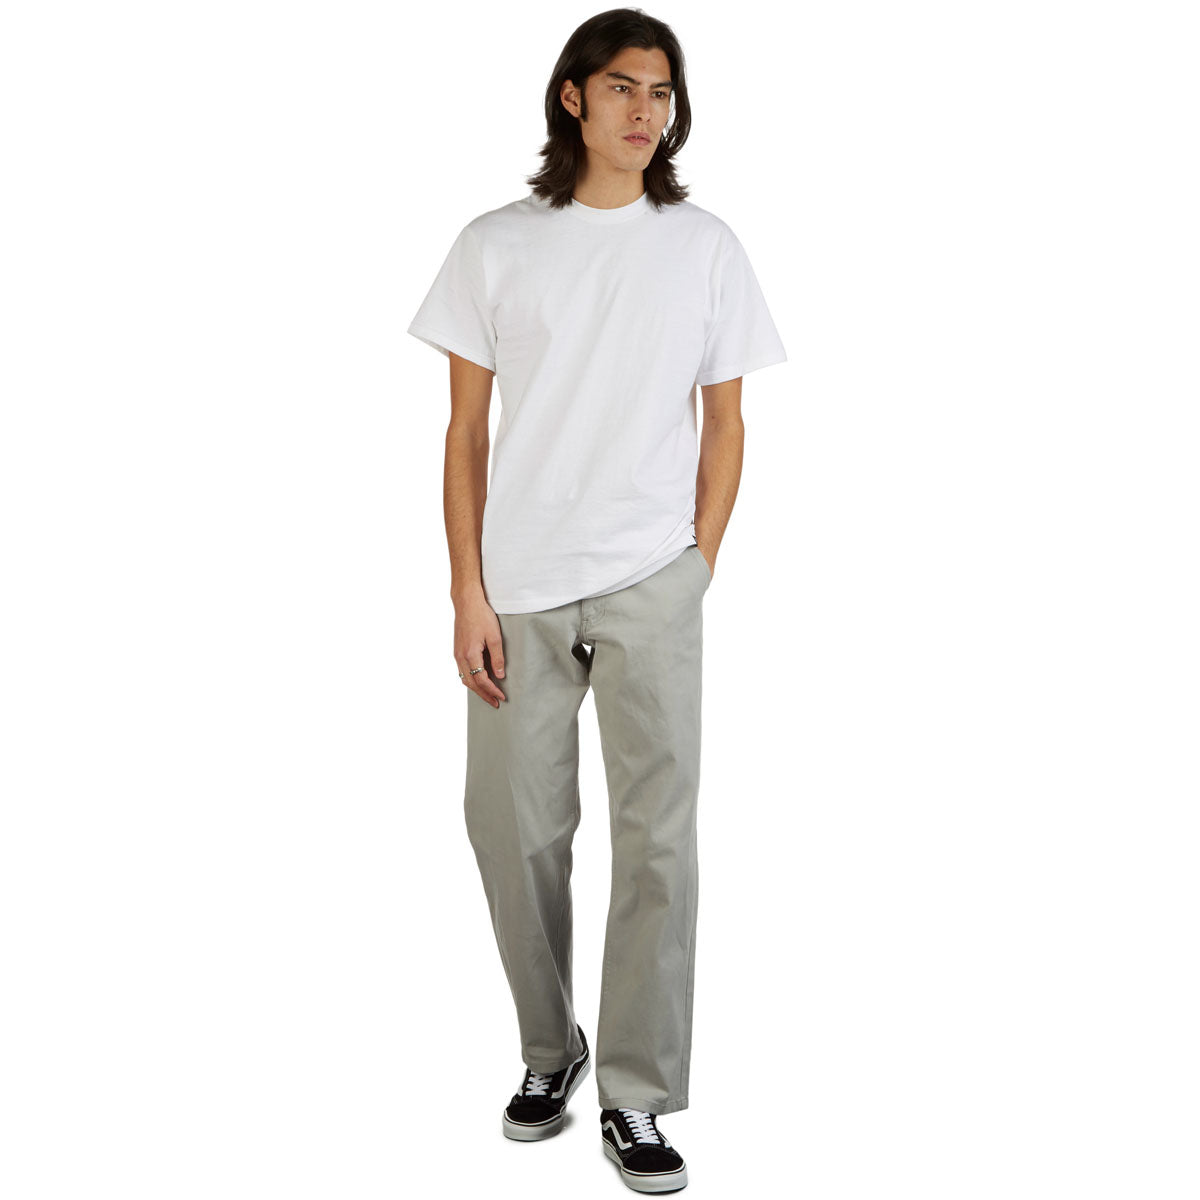 CCS Standard Plus Relaxed Chino Pants - Dove Grey image 2